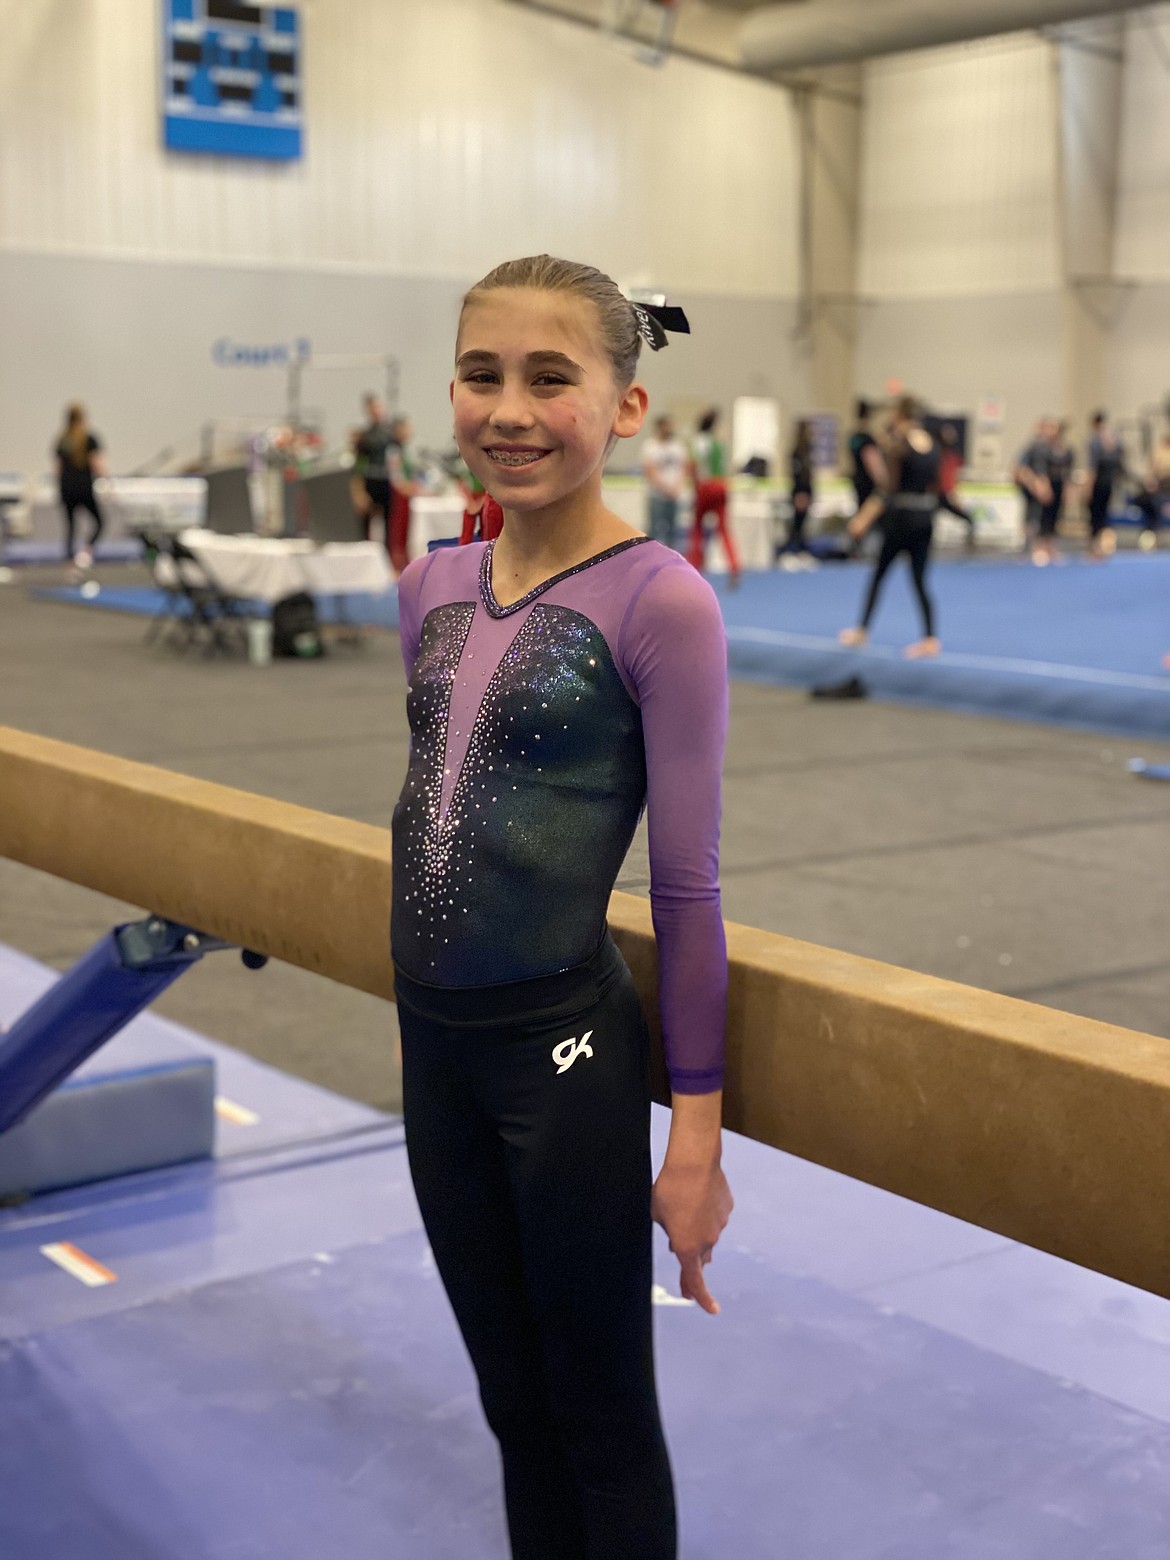 Courtesy photo
River Kermelis of Avant Coeur Gymnastics competed at the Idaho Xcel state championships in Pocatello the weekend of March 20. River took 5th on Bars with a 9.300, 9th on Beam with a 8.850, 8th on Floor with a 8.900 and 7th All Around with a 35.575.